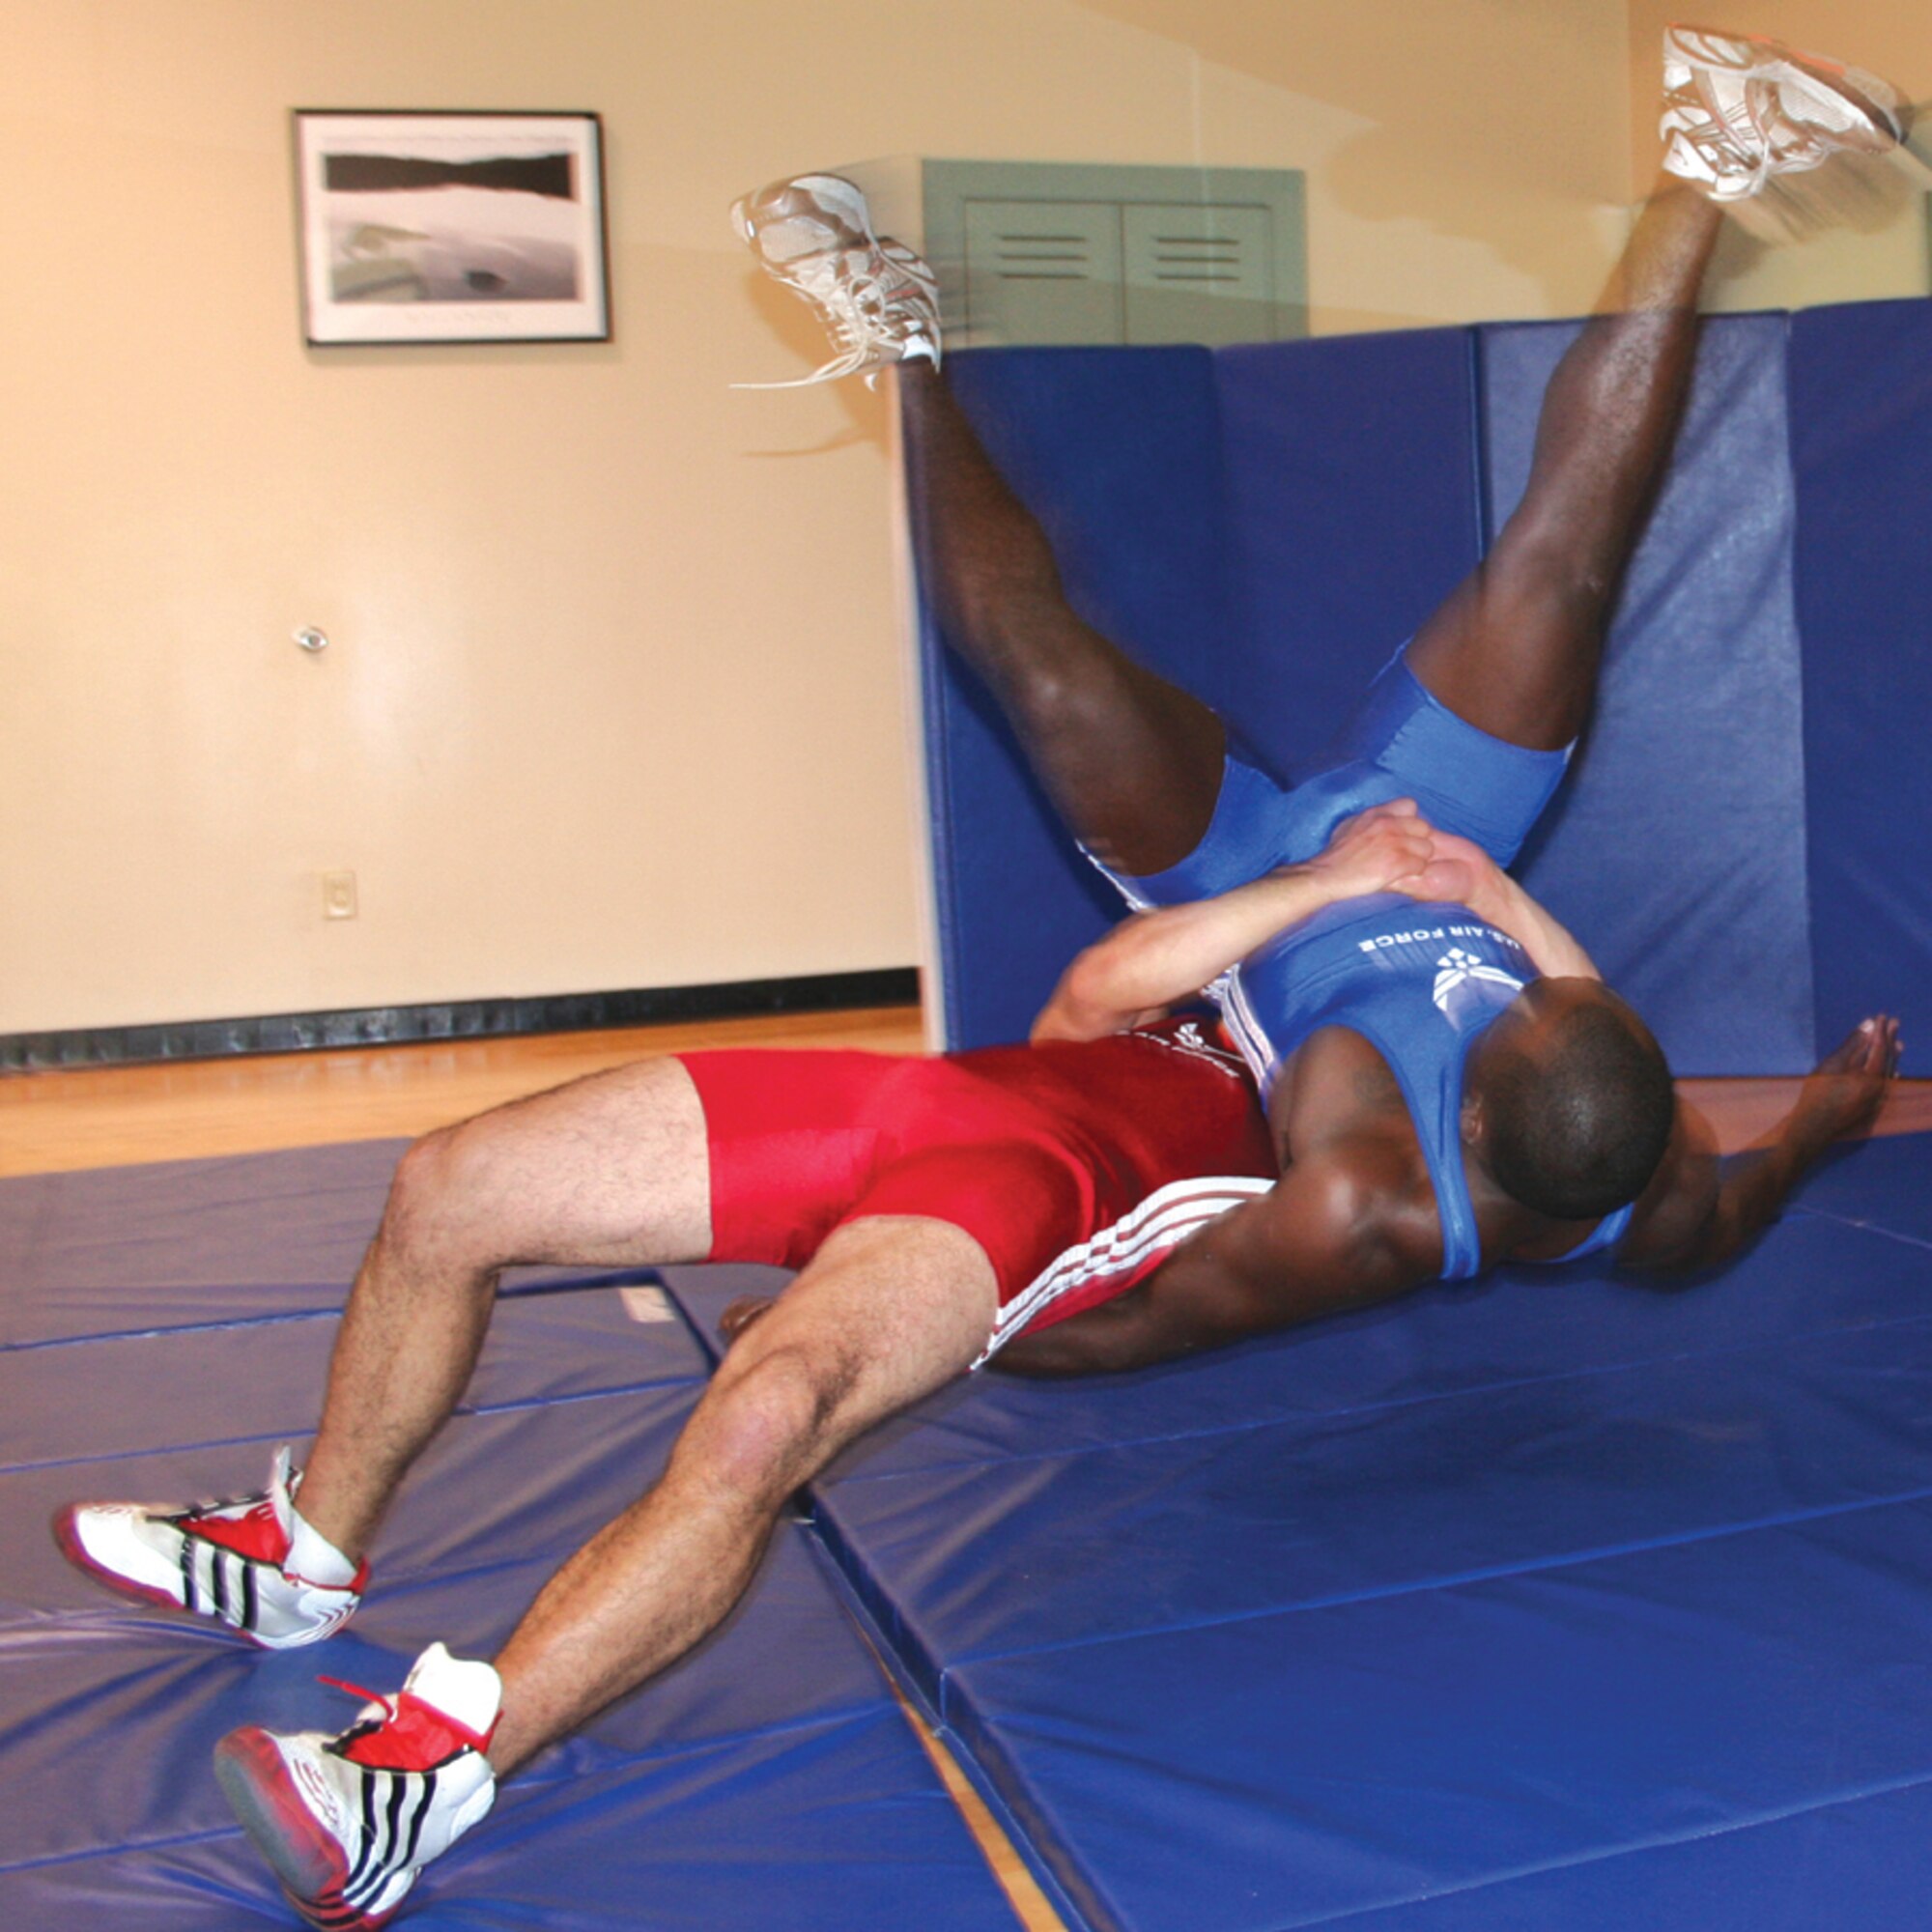 Senior Airman Christopher Anderson (in red), 720th Operations Support Squadron, practices his wrestling moves on a fellow combat controller Tuesday at the Riptide Fitness Center. Airman Anderson has already taken on the Greco-Roman wrestling world at Air Force and national levels. Now, he is in training to try out for the 2008 Olympic wrestling team. (U.S. Air Force photo by 2nd Lt. Jesse Brannen)